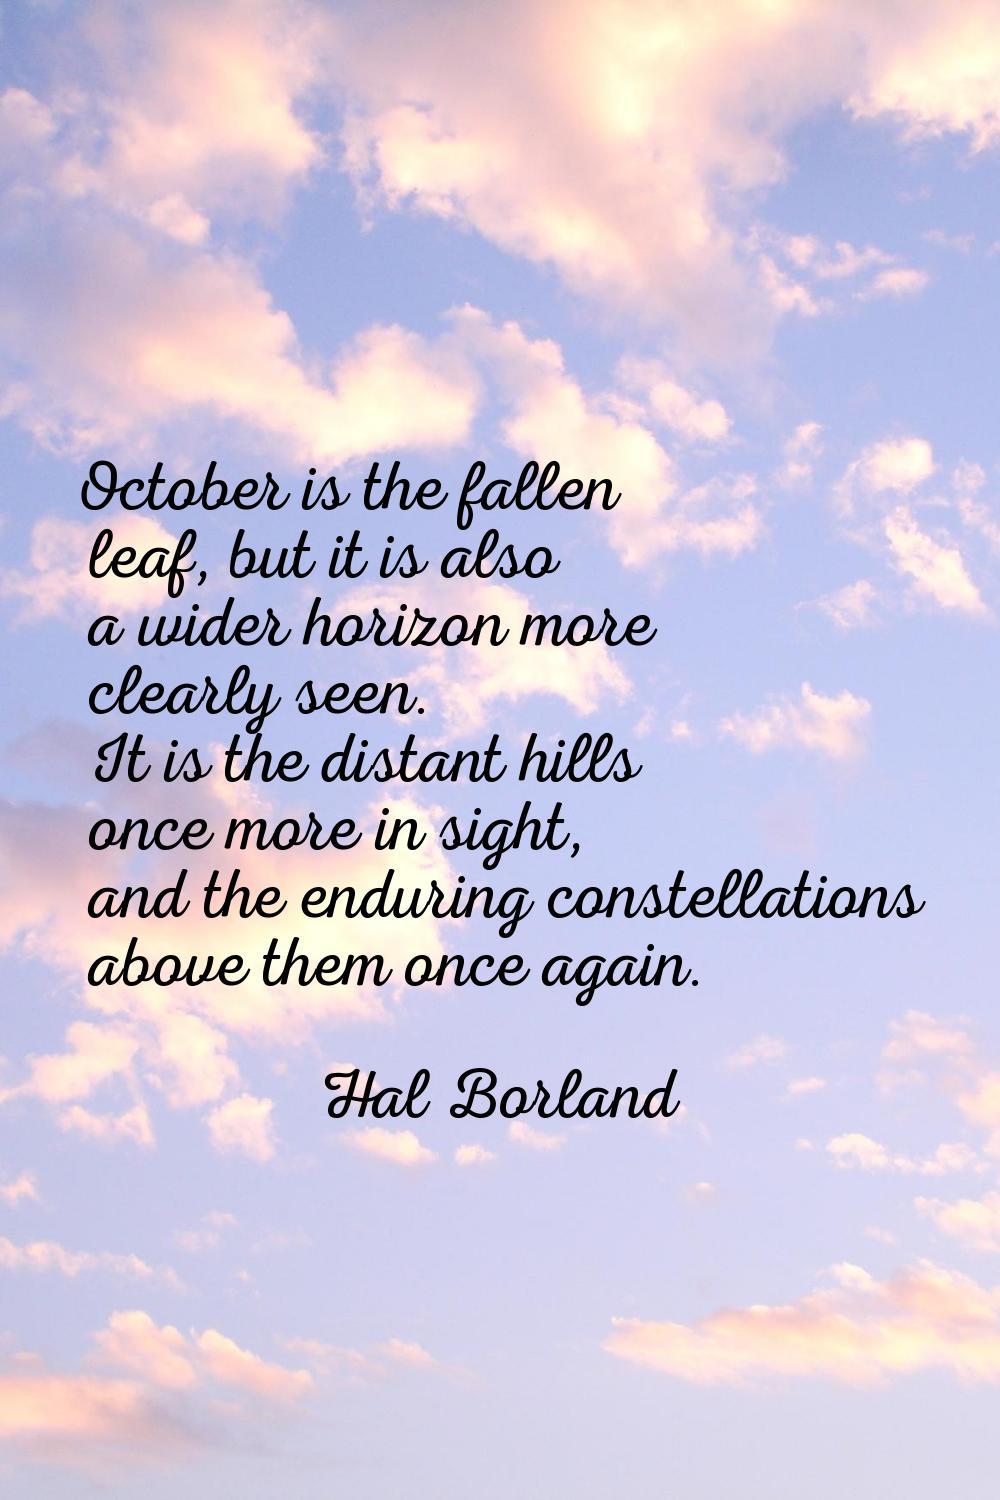 October is the fallen leaf, but it is also a wider horizon more clearly seen. It is the distant hil